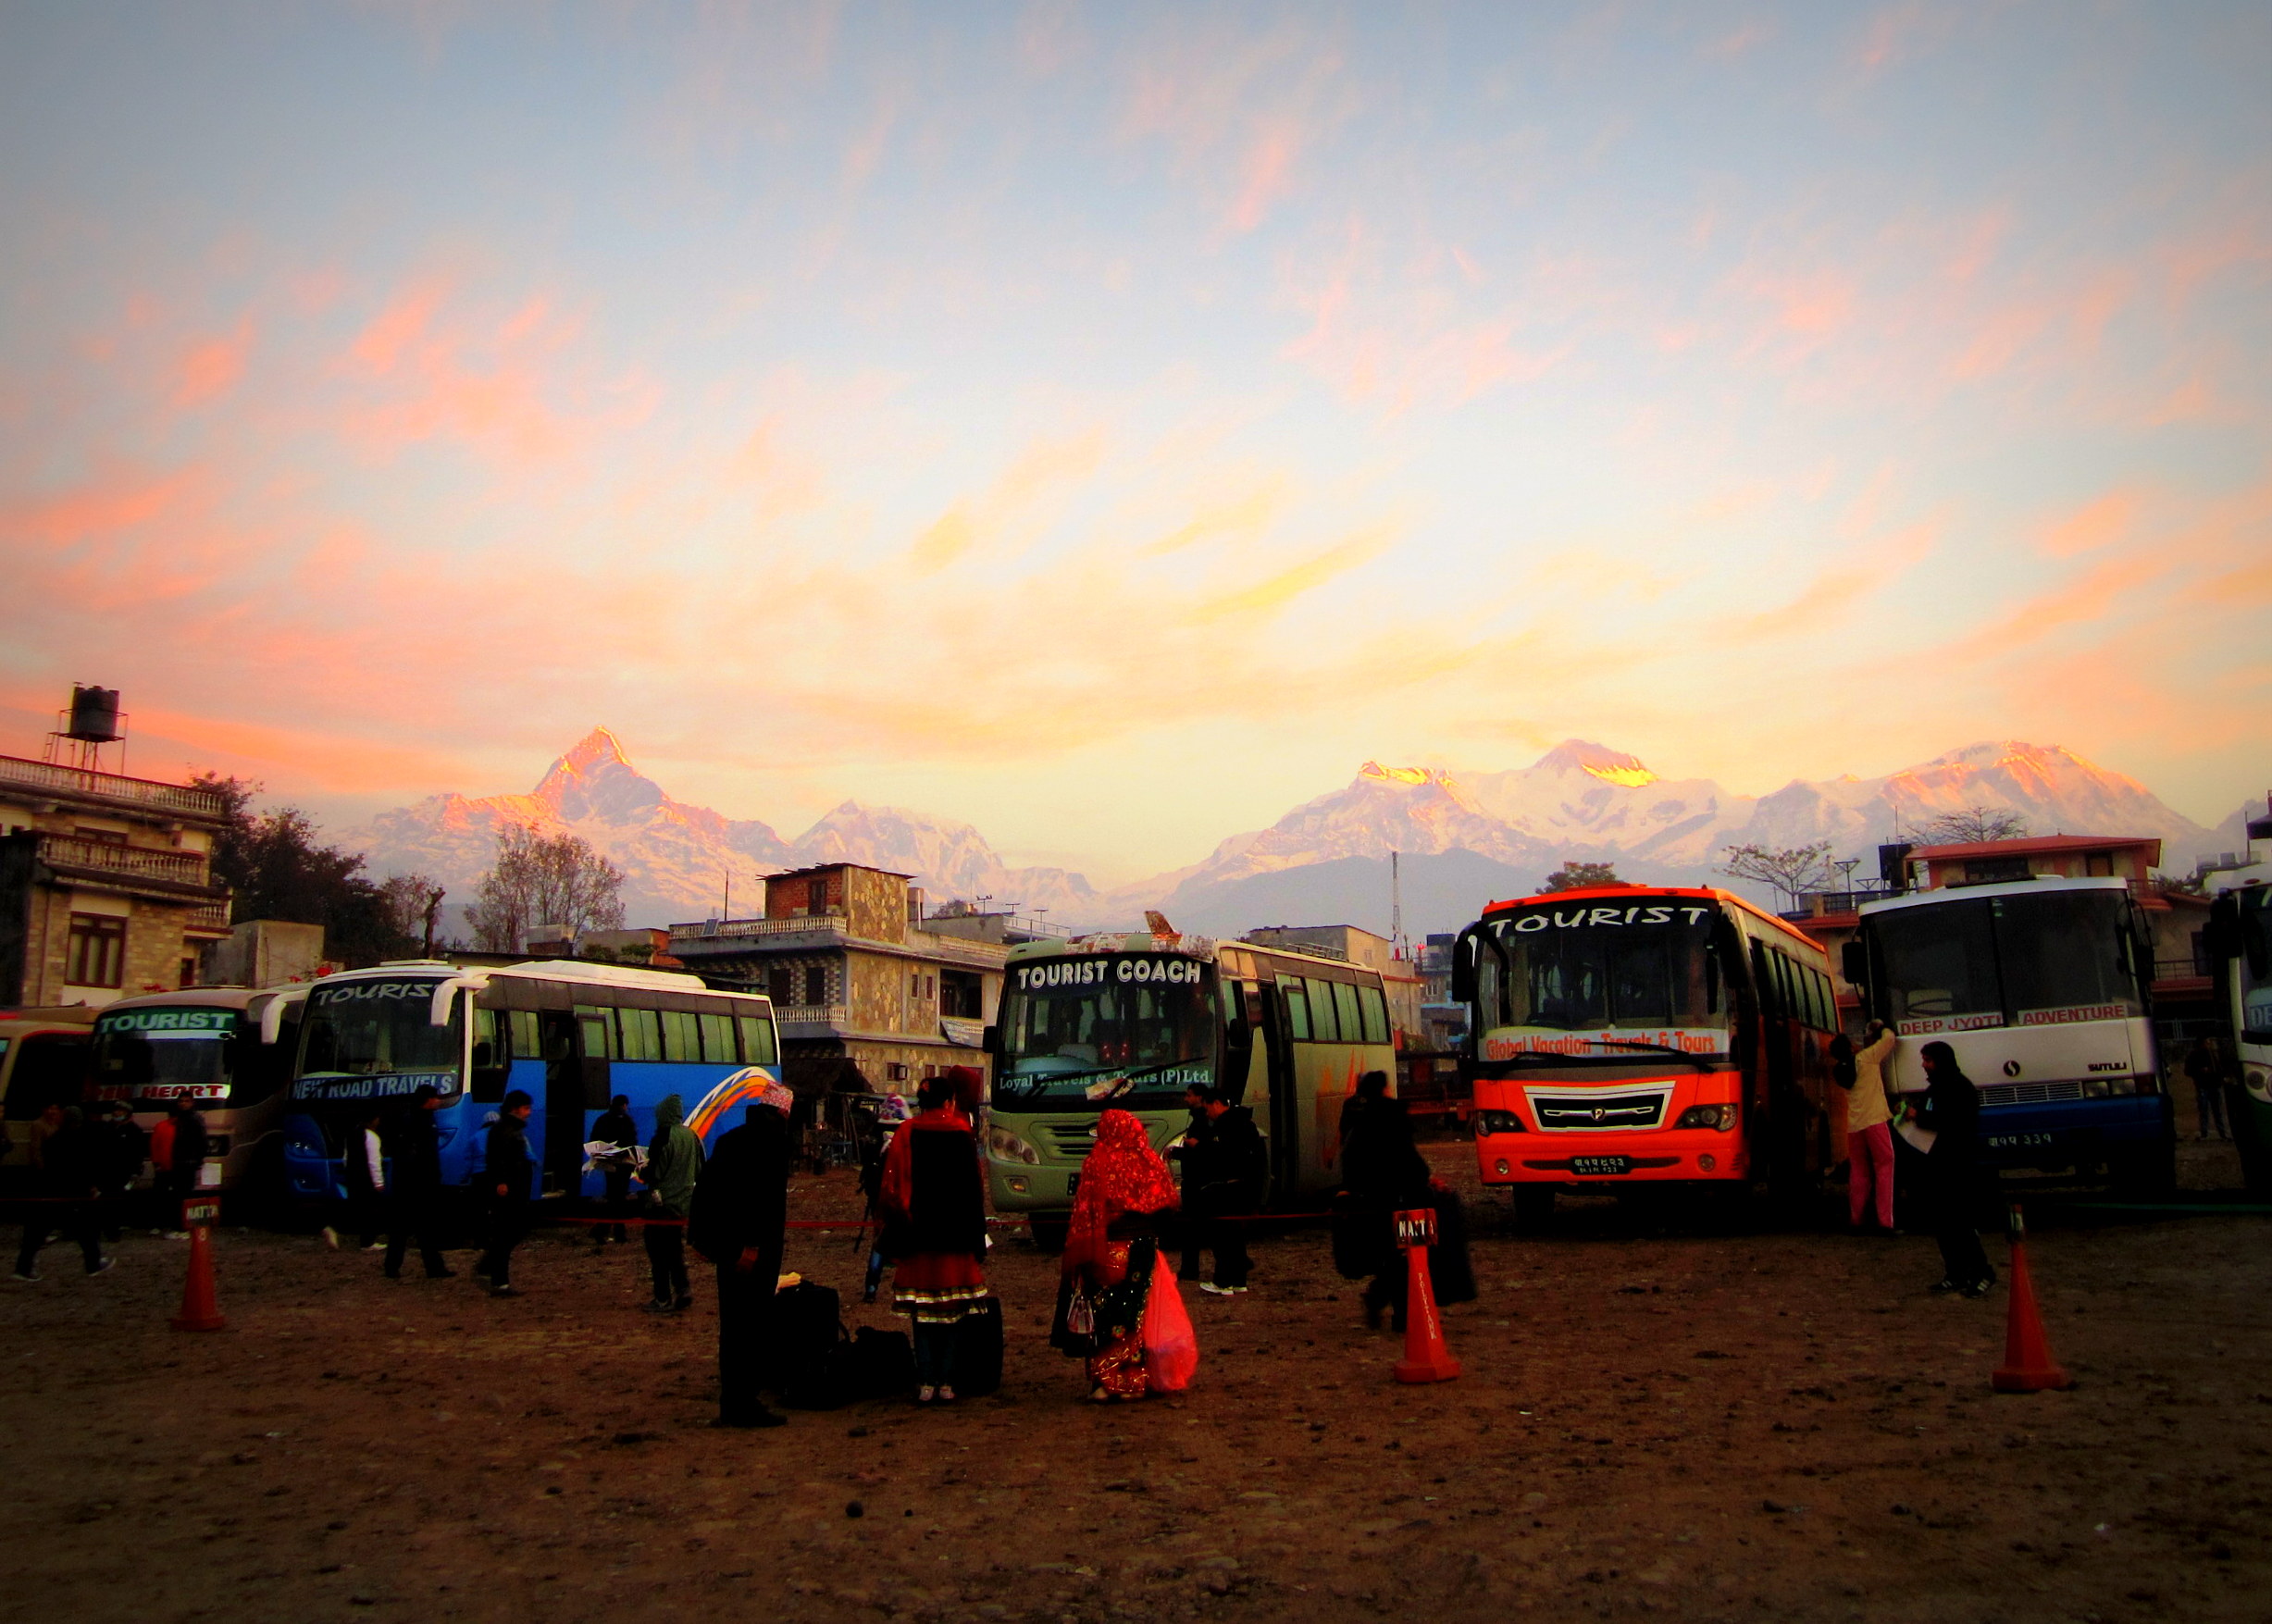 The sunrise as we caught a bus out of Pokhara back to Kathmandu, Nepal